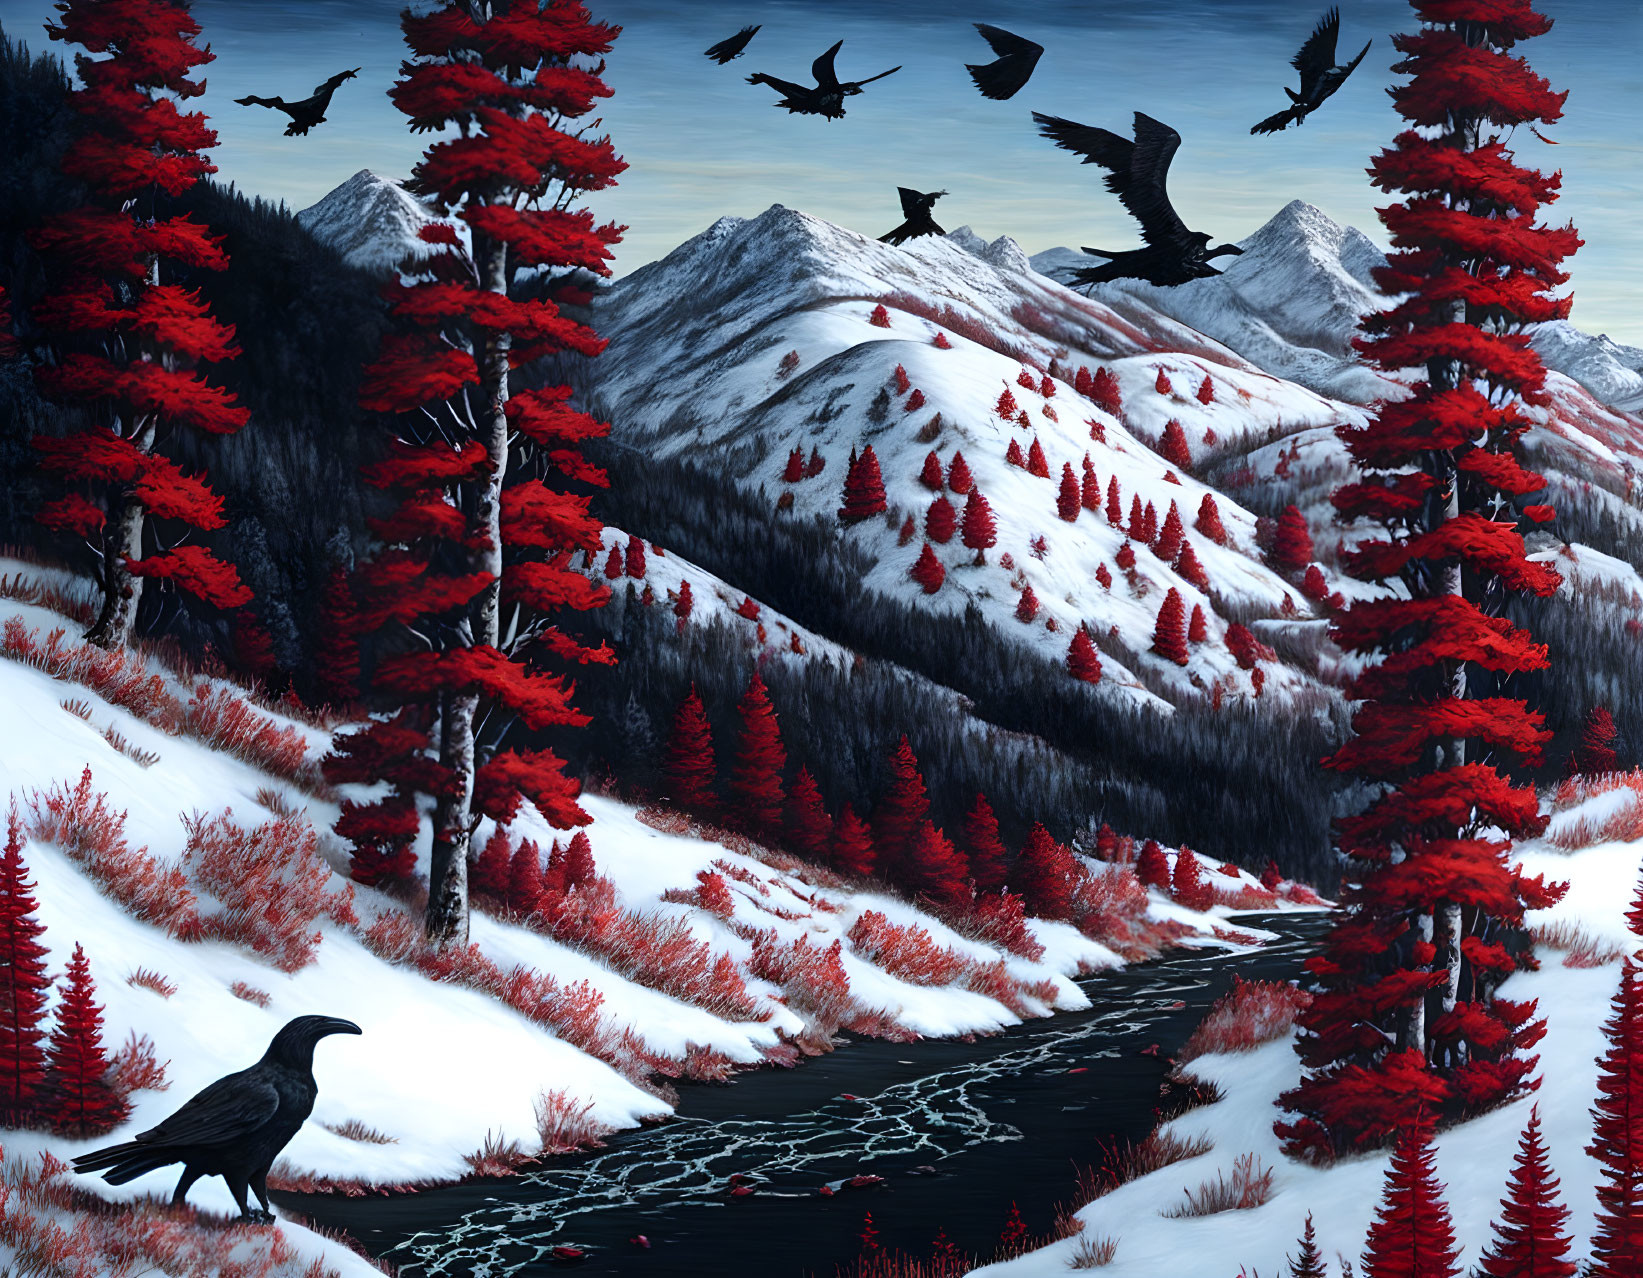 Snowy Mountain Landscape with Red Foliage and Crows by Winding Stream